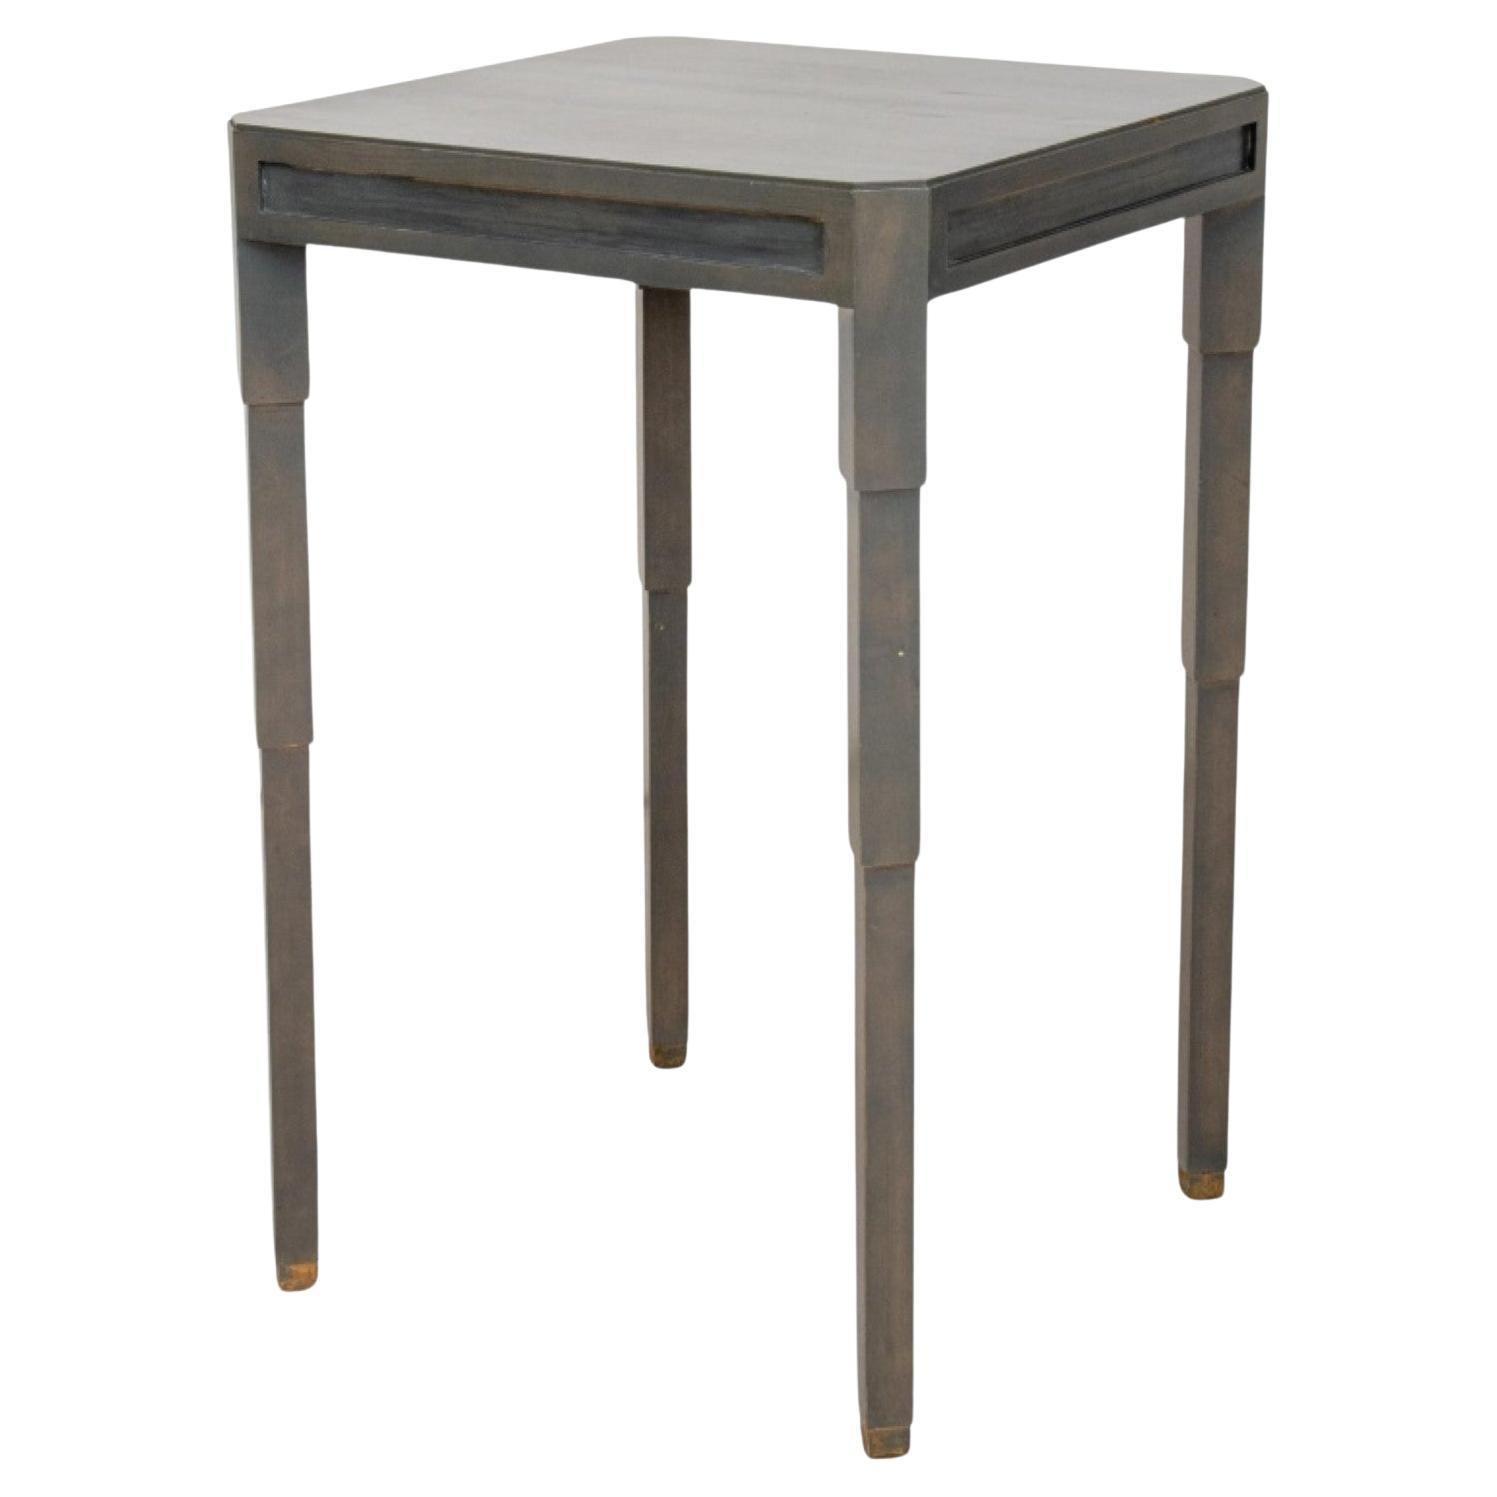 Modern Art Deco Style Painted Table For Sale